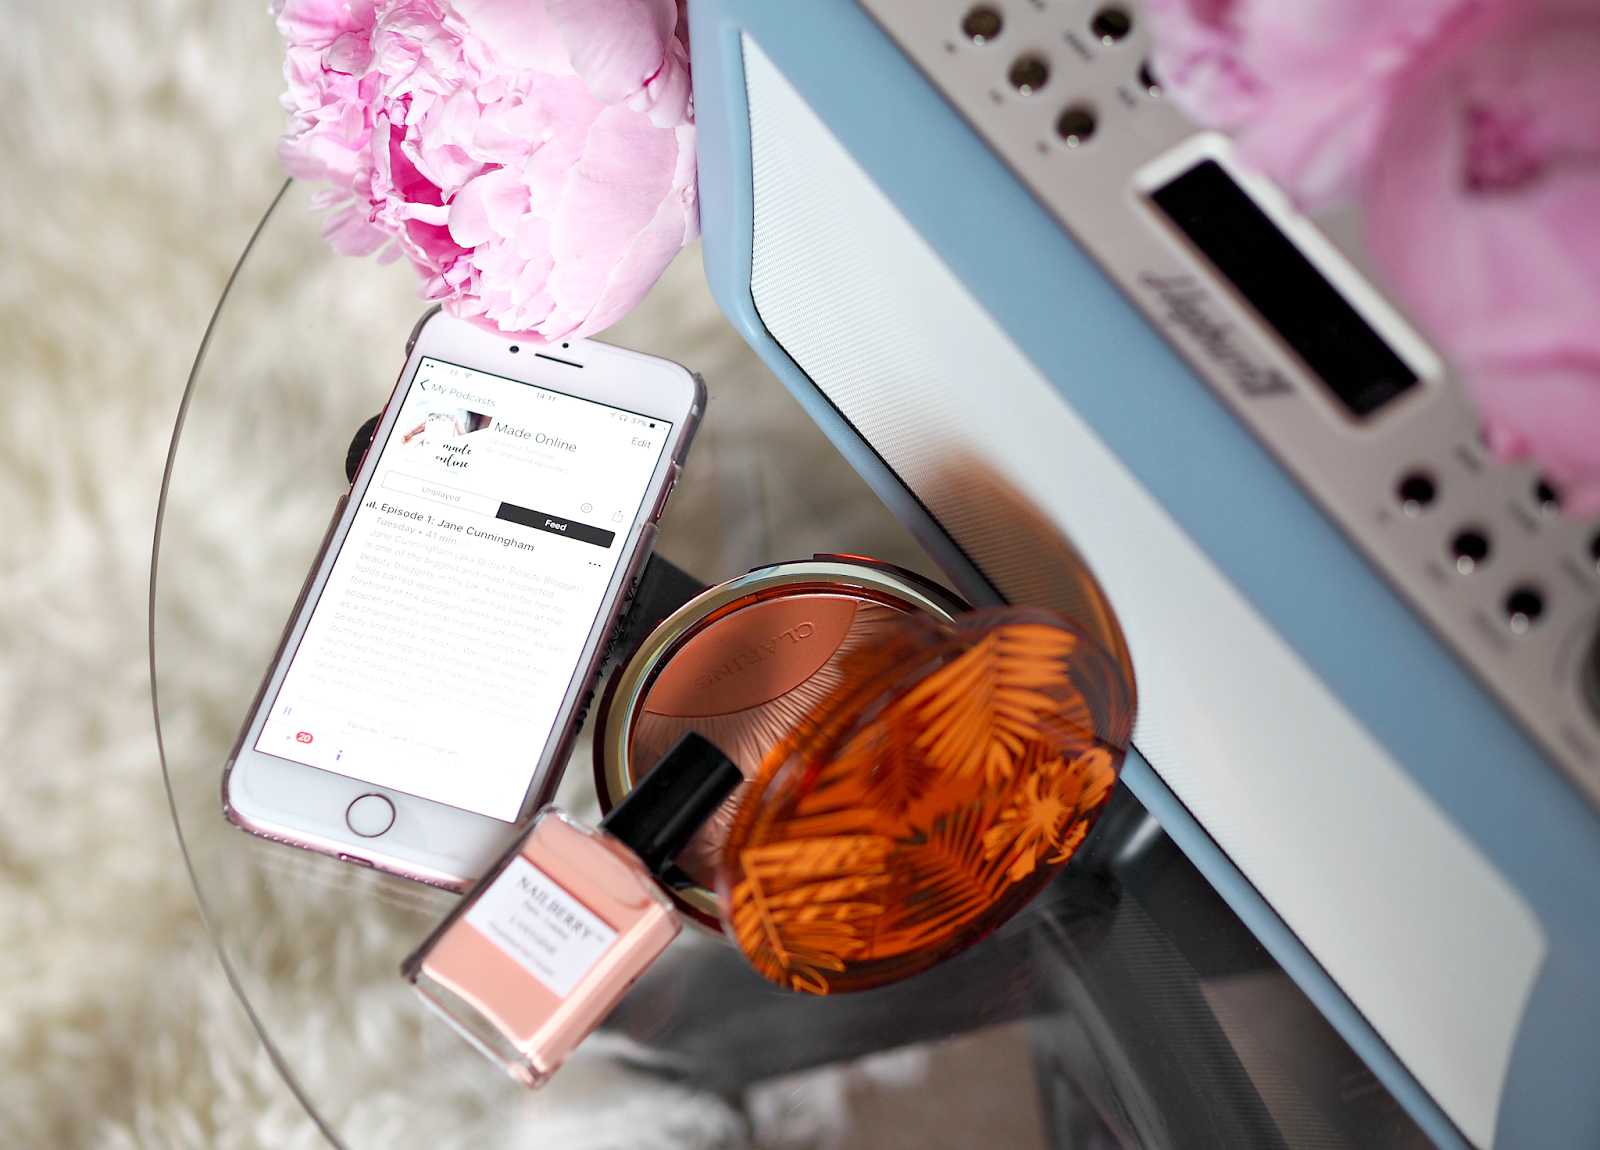 The Lowdown On Podcasts, Why I'm Addicted & How You Can Get Involved (Plus Some Of My Faves!)